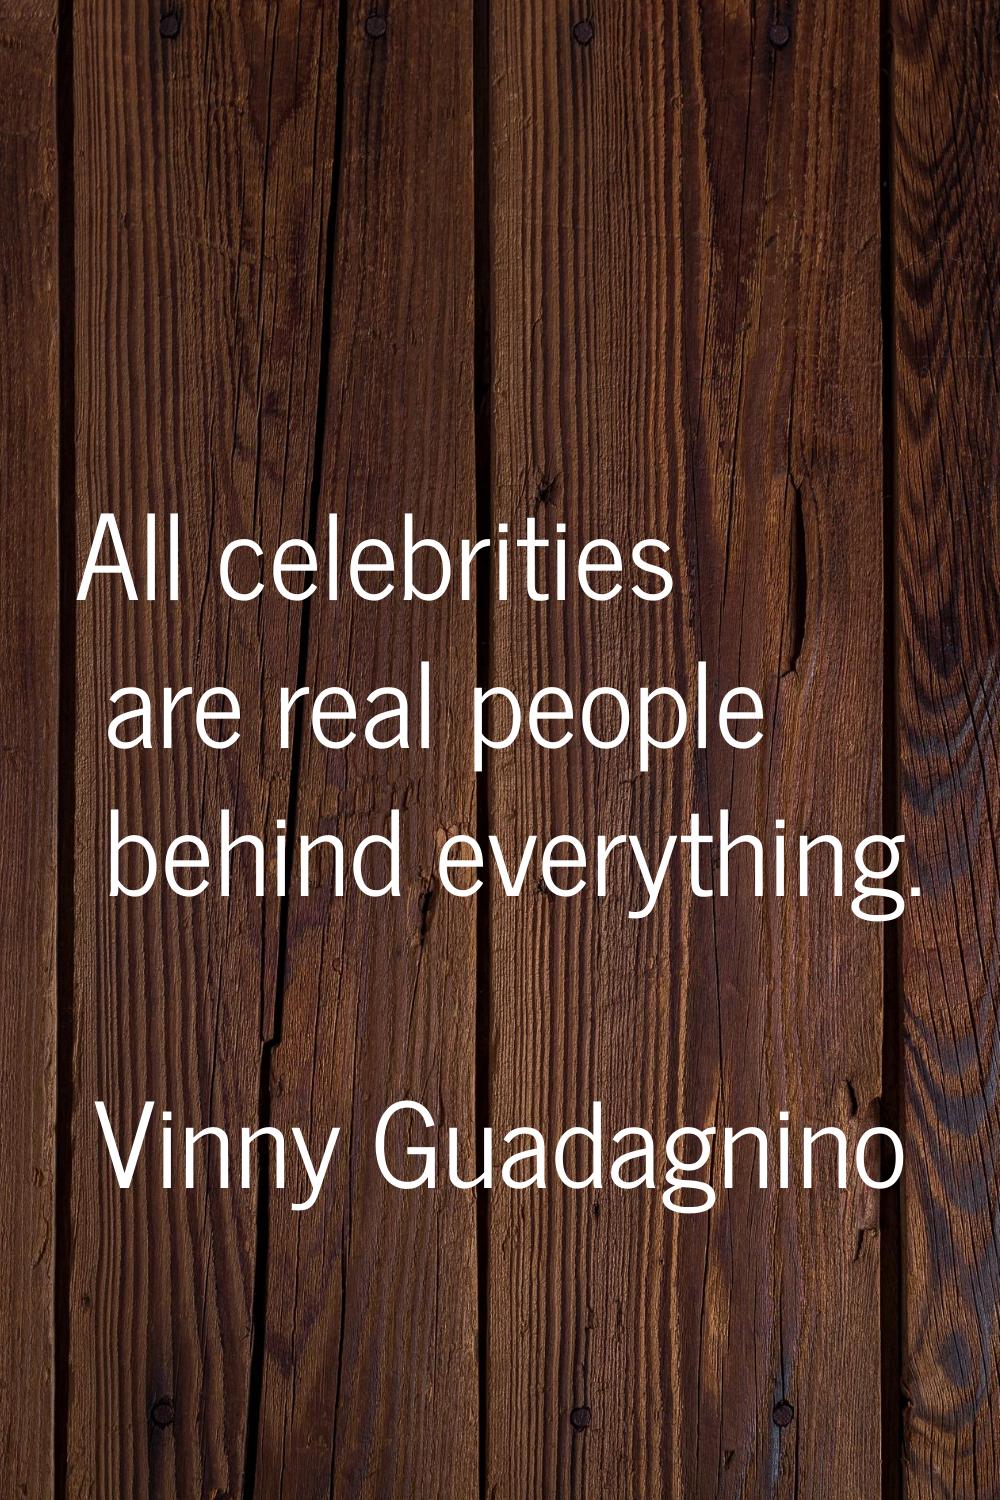 All celebrities are real people behind everything.